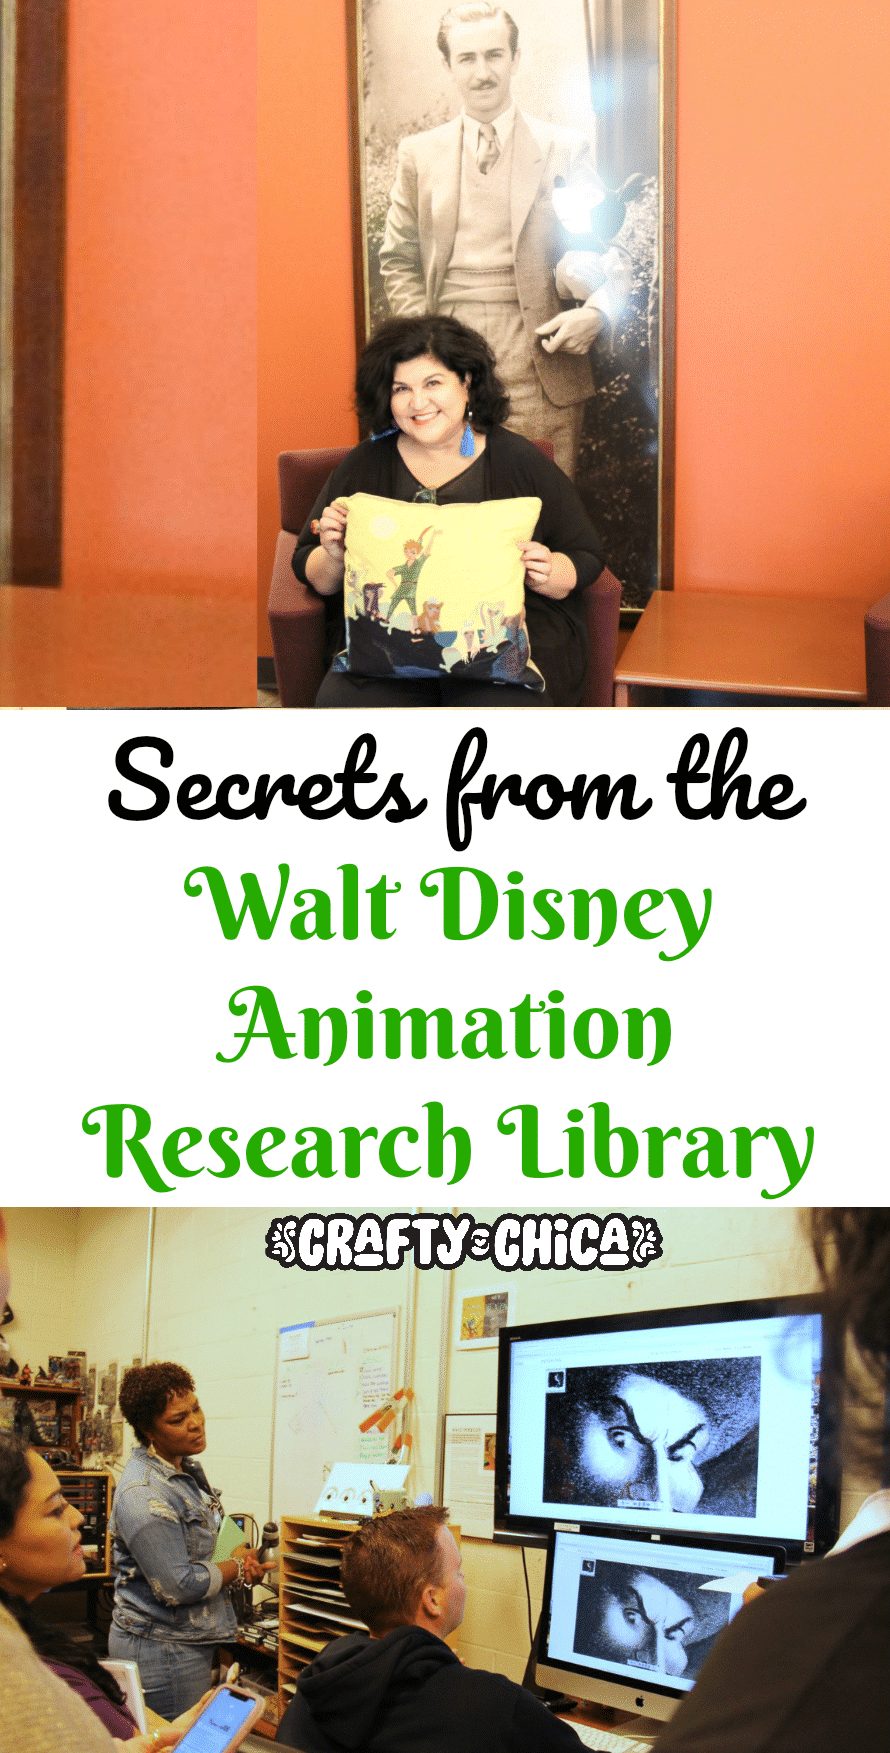 Crafty Chica at Disney Animation Research Library.